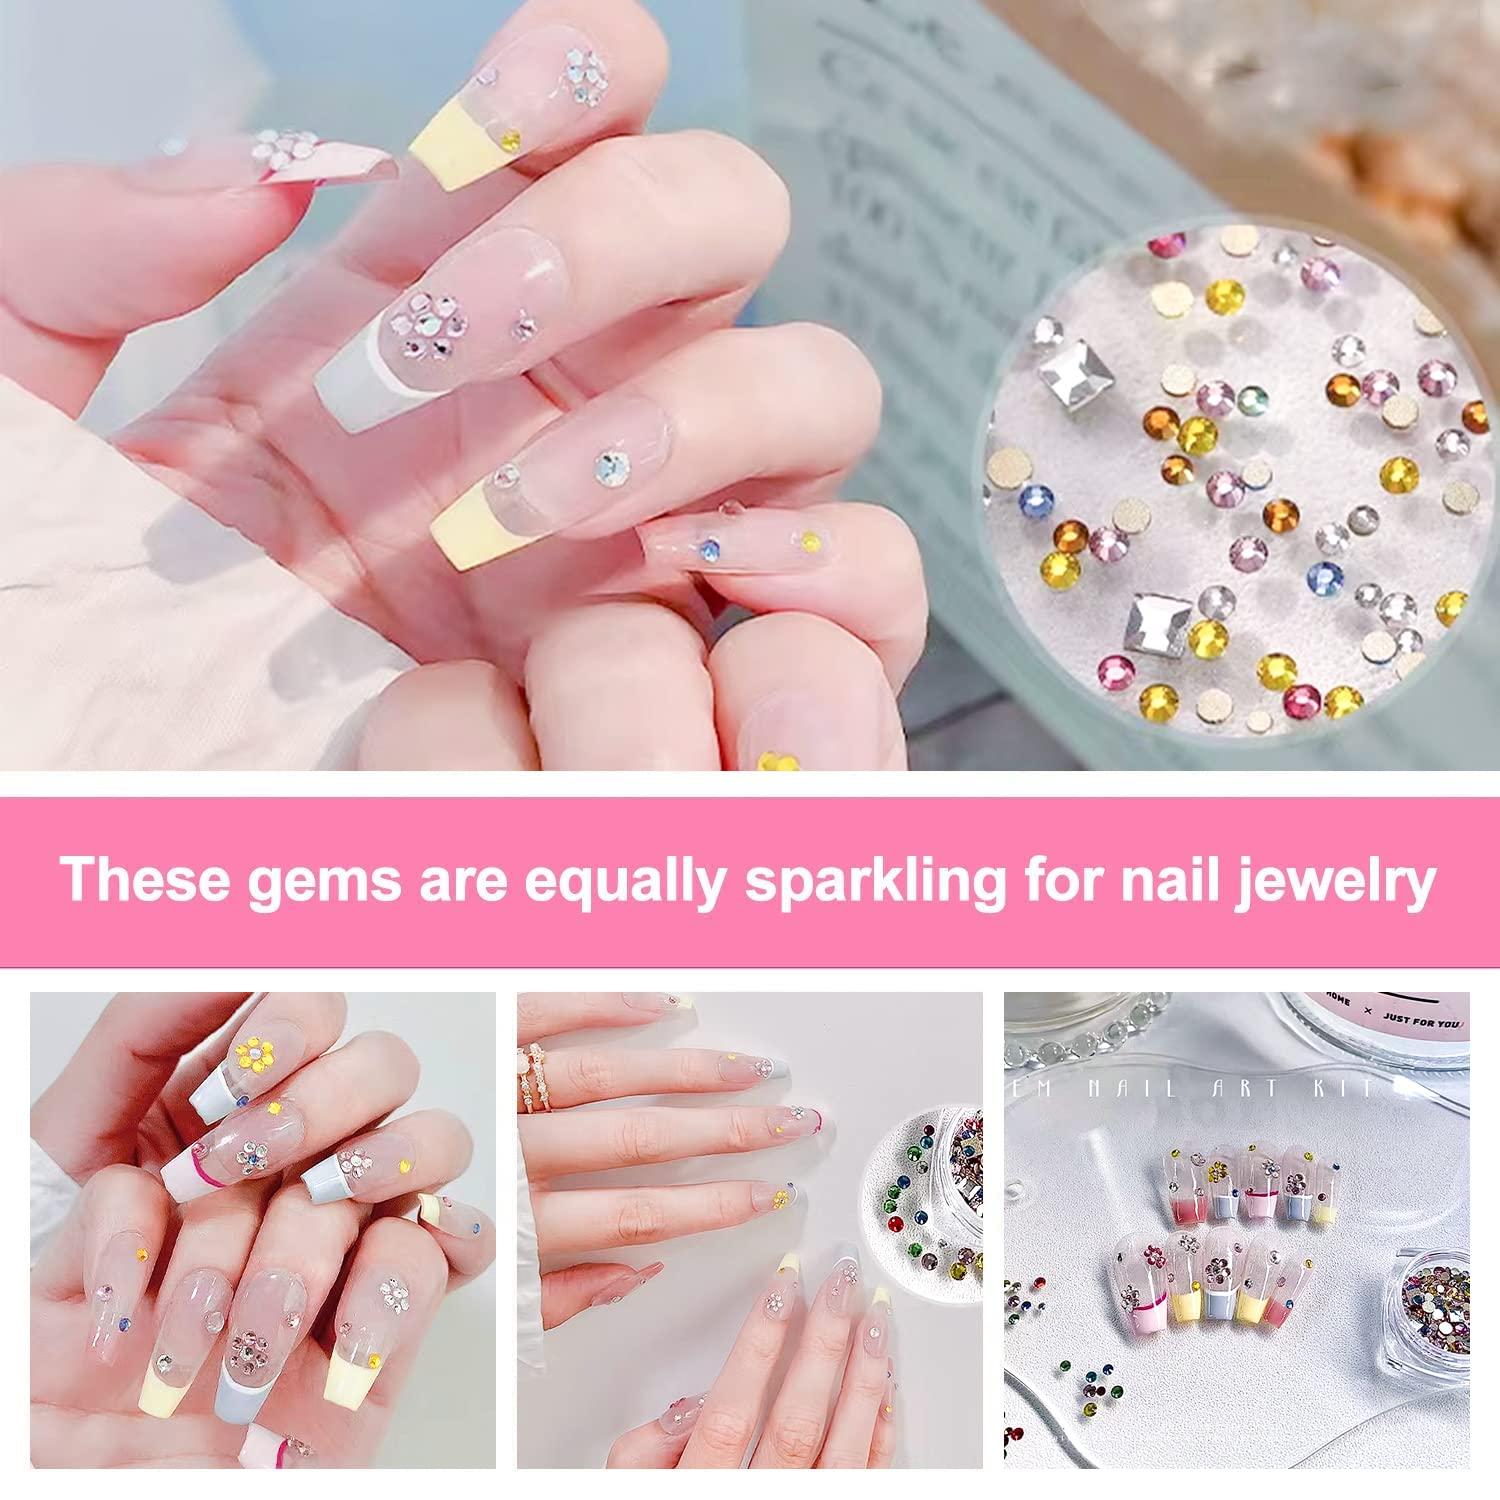 Permanent Makeup Inks Tooth Gem Set Easy To Remove Beautiful White Jewelry  Reflective Teeth Ornament Application Kit For Girl 22119995586 From Cjrj,  $20.4